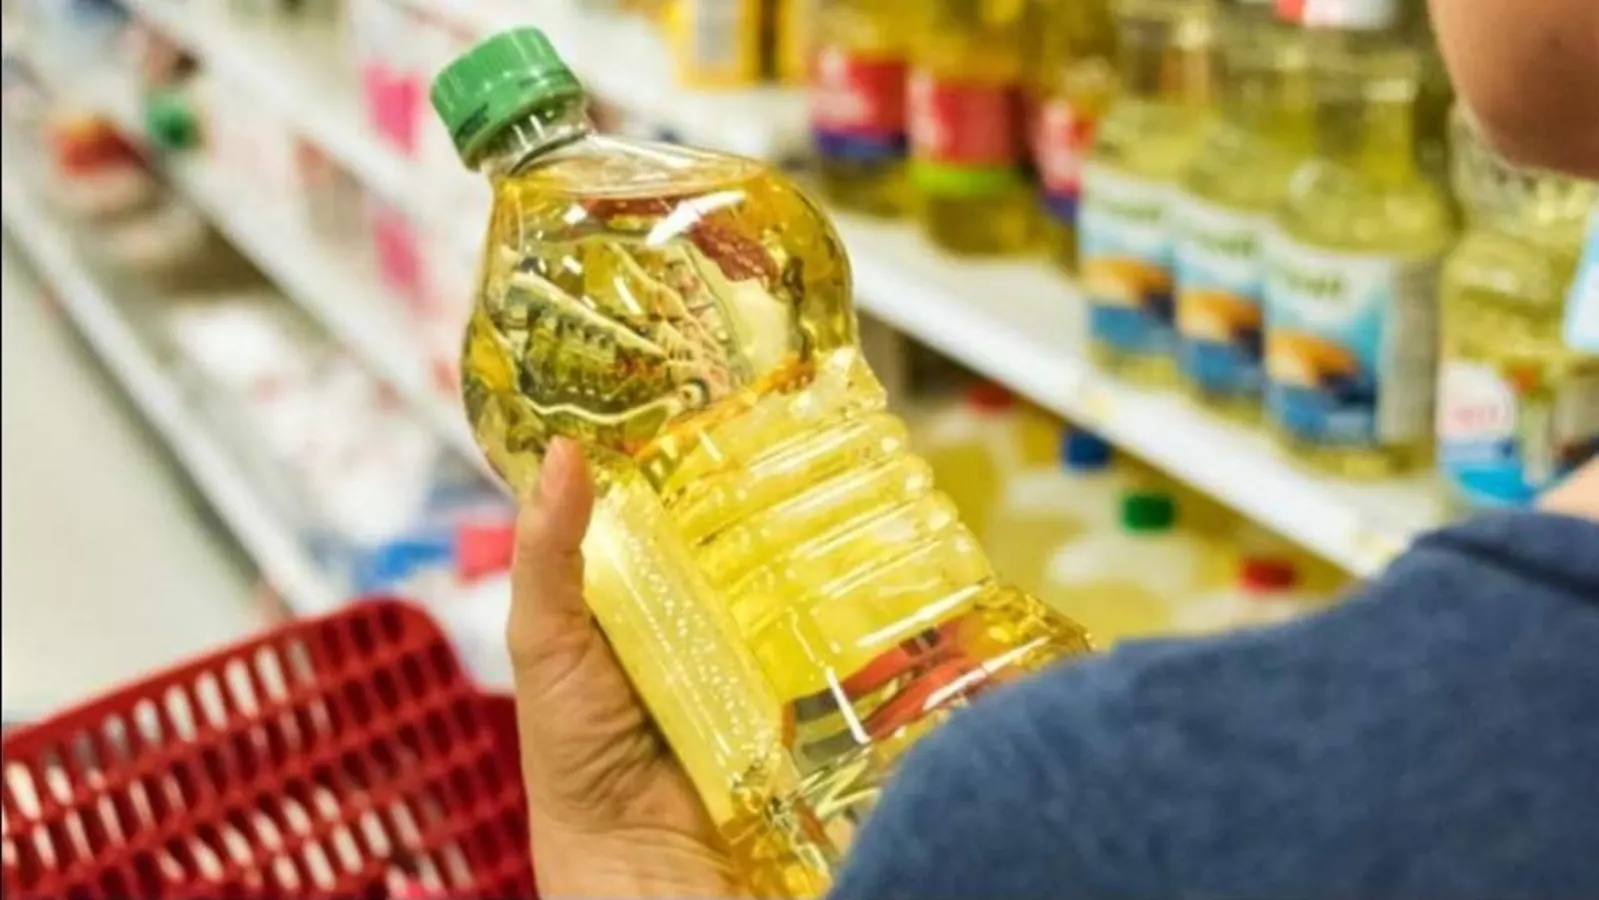 Cooking oil prices to rise amid Russia-Ukraine war? Here’s what we know so far